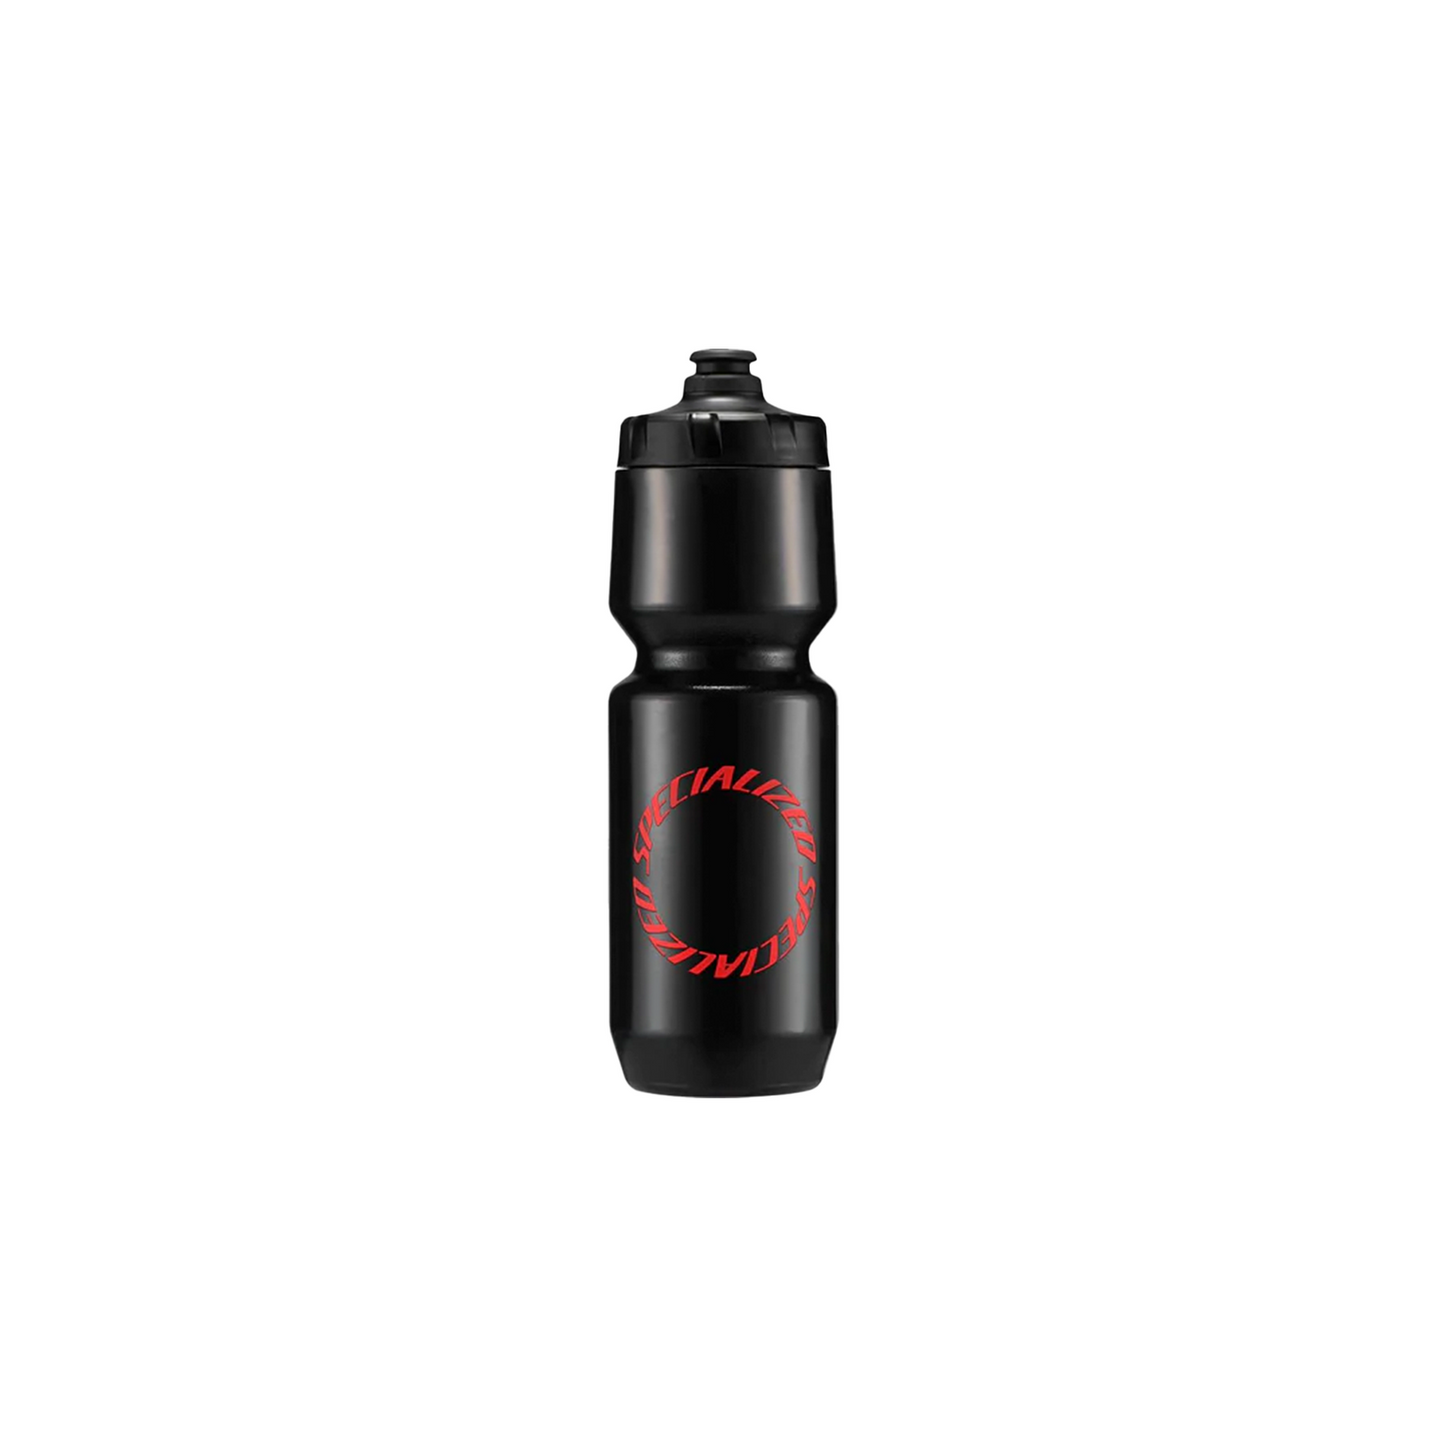 Purist MoFlo Topographic Ride - 26oz | Complete Cyclist - The Purist MoFlo Bottle features an amorphous silicon dioxide coating that's infused into the inner-wall of the bottle. Essentially, this forms a glass-like finish that provides a totally natural, and completely inert, solution to the problem of your drinks staining the bottle or leaving behind any residual aftertaste. 